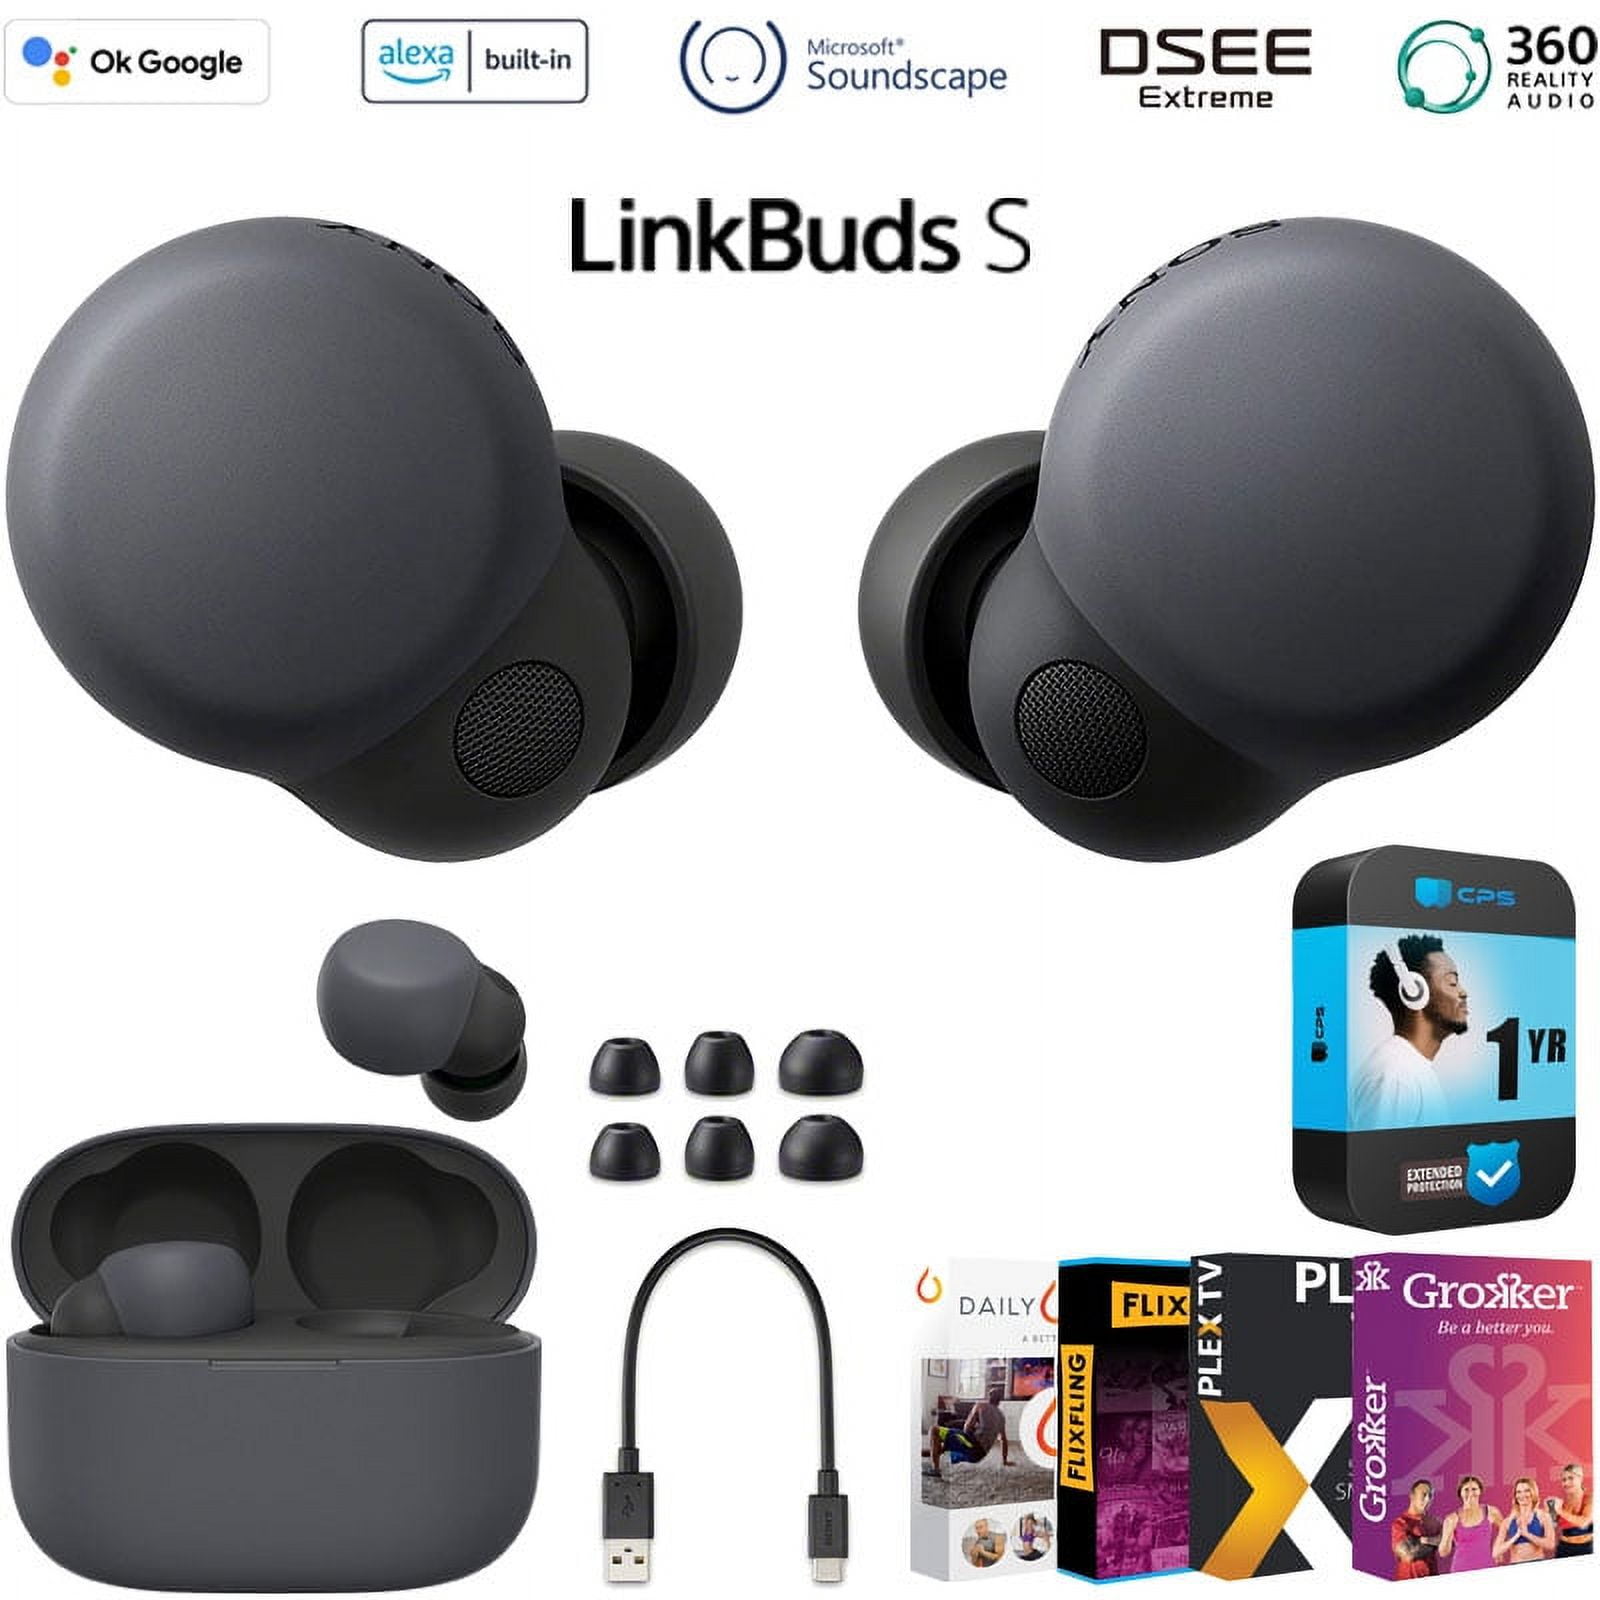  Sony LinkBuds S Truly Wireless Noise Cancelling Headphones -  Multipoint Connection - Ultra Light for All-Day Comfort with Crystal Clear  Call Quality - Up to 20 Hours Battery Life - Black : Electronics